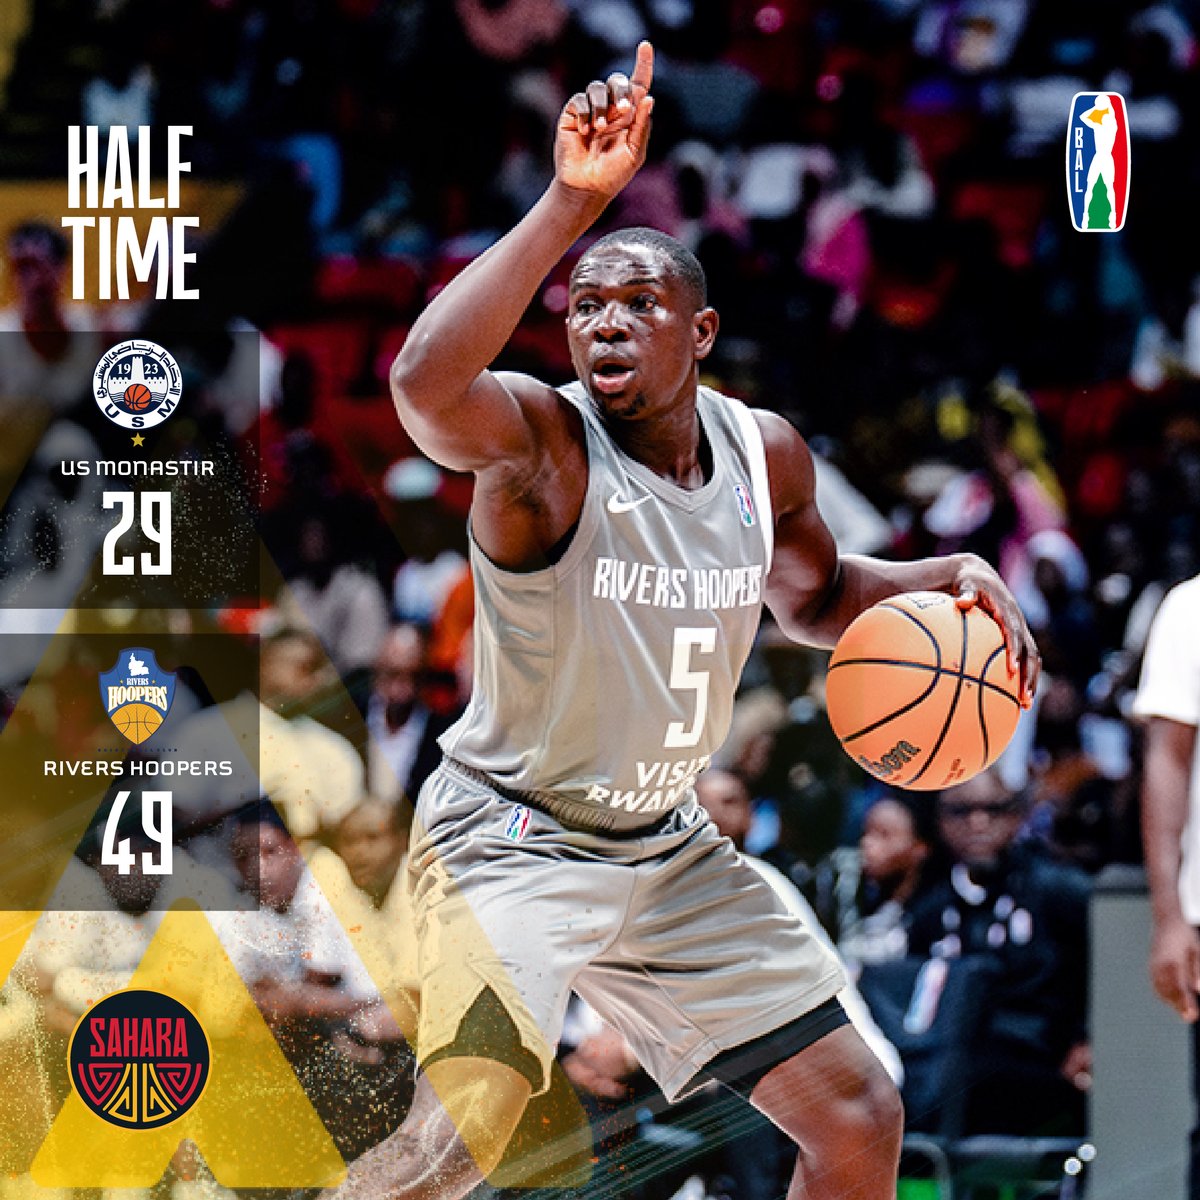 Rivers Hoopers are all about business as they take a substantial 20-point lead heading into the break. #BAL4

Follow all the second-half action on our YouTube channel: youtube.com/watch?v=1DtoDL…